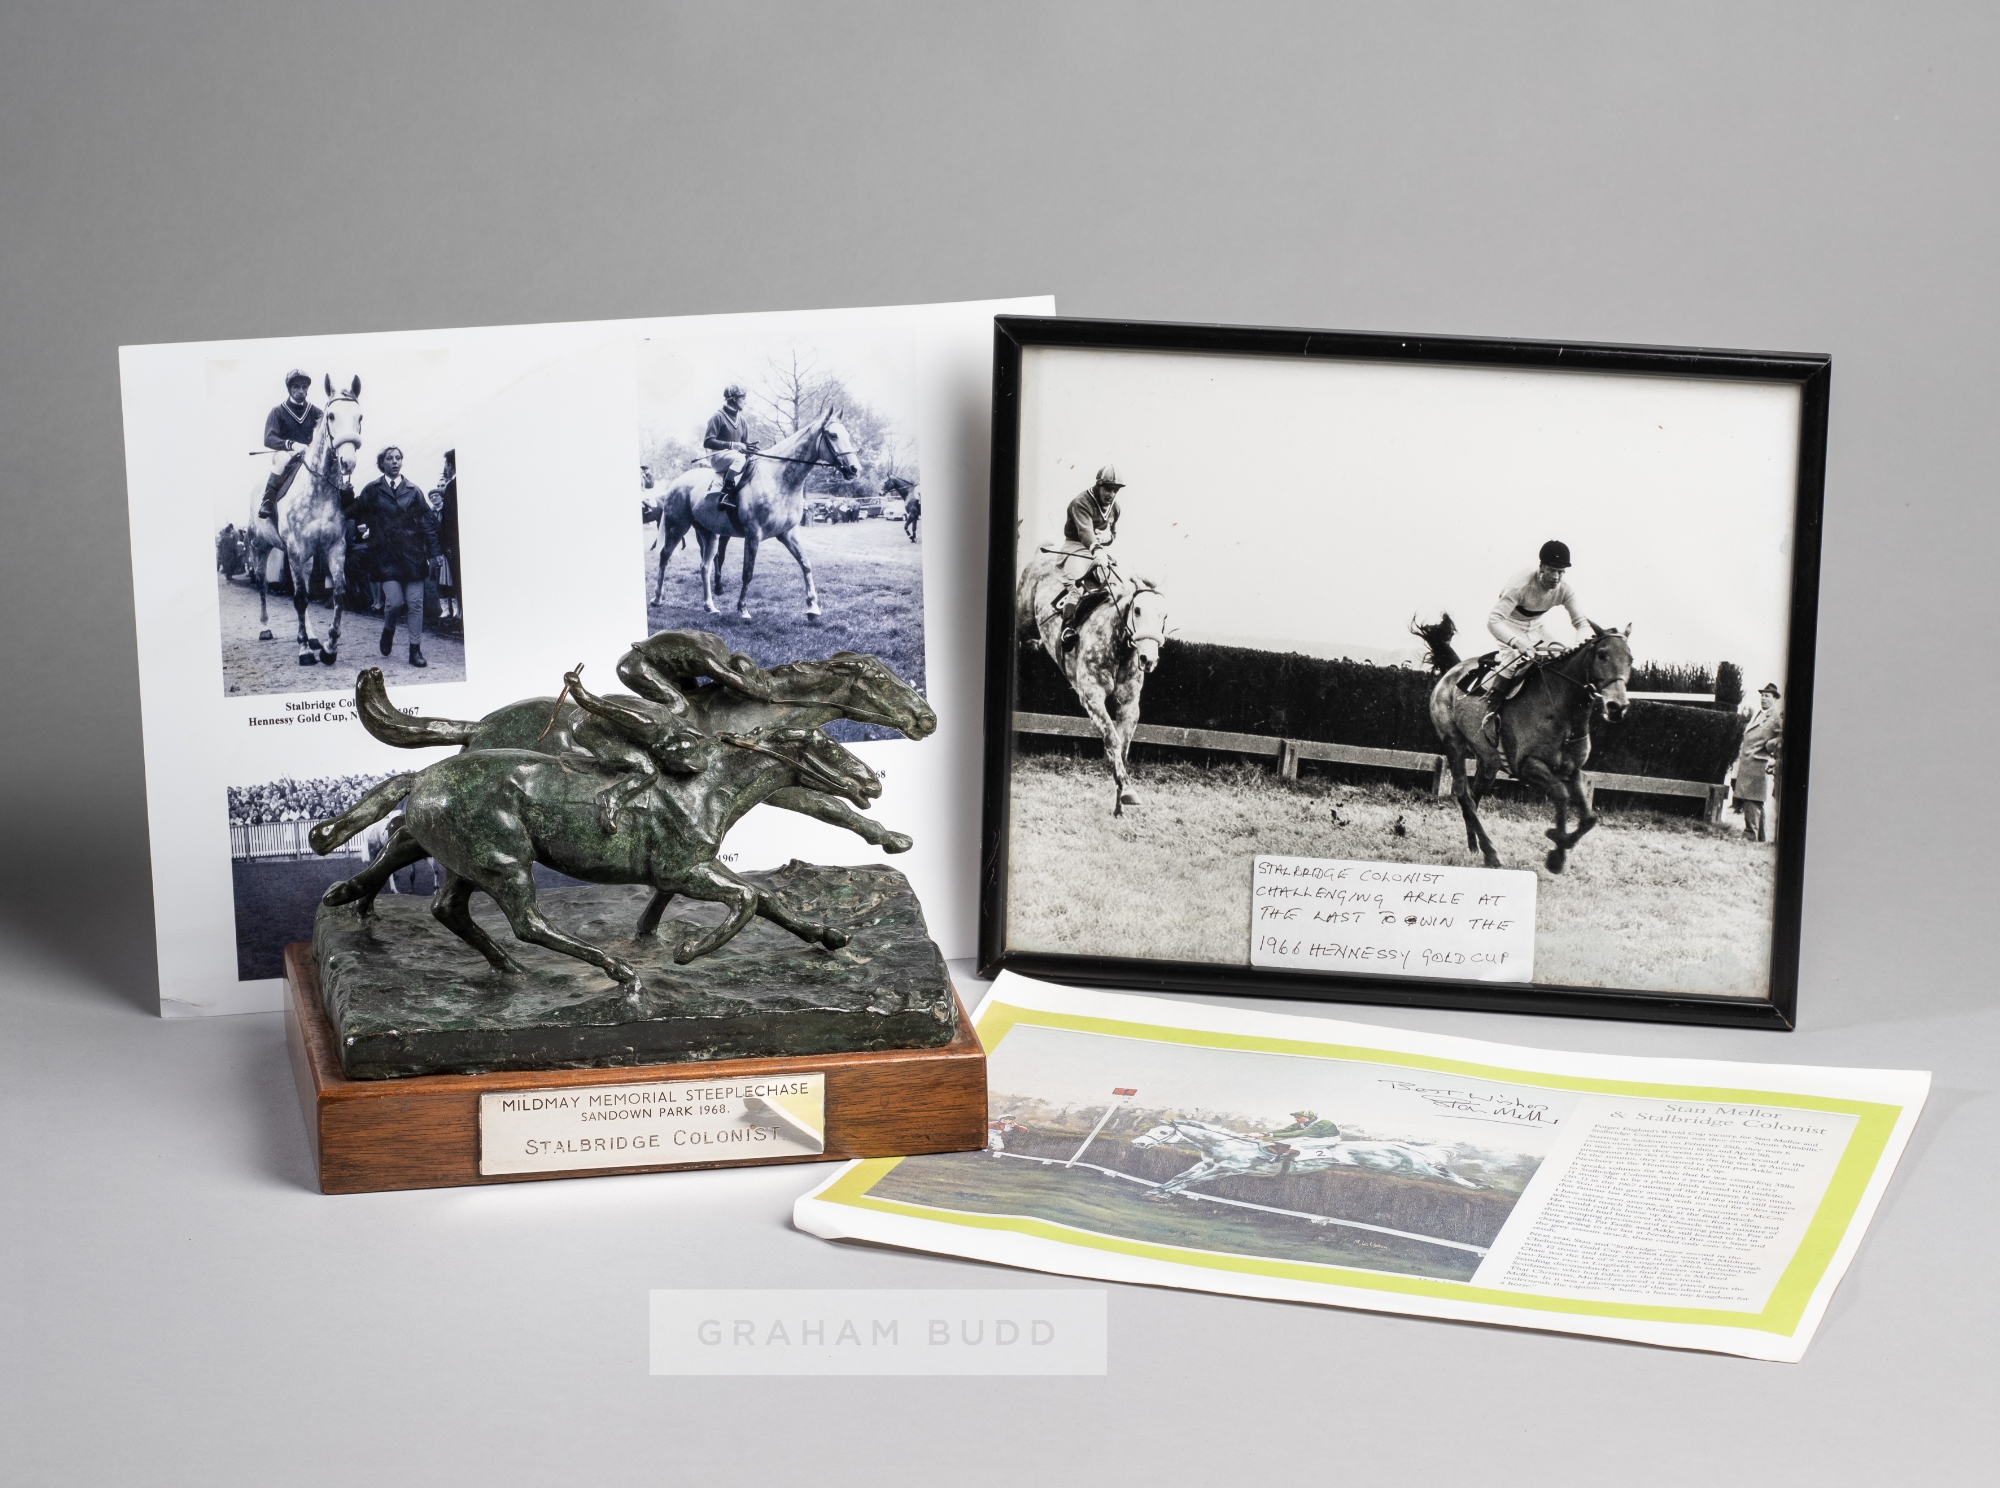 The Mildmay Memorial Steeplechase bronze trophy awarded to jockey Stan Mellor for winning on